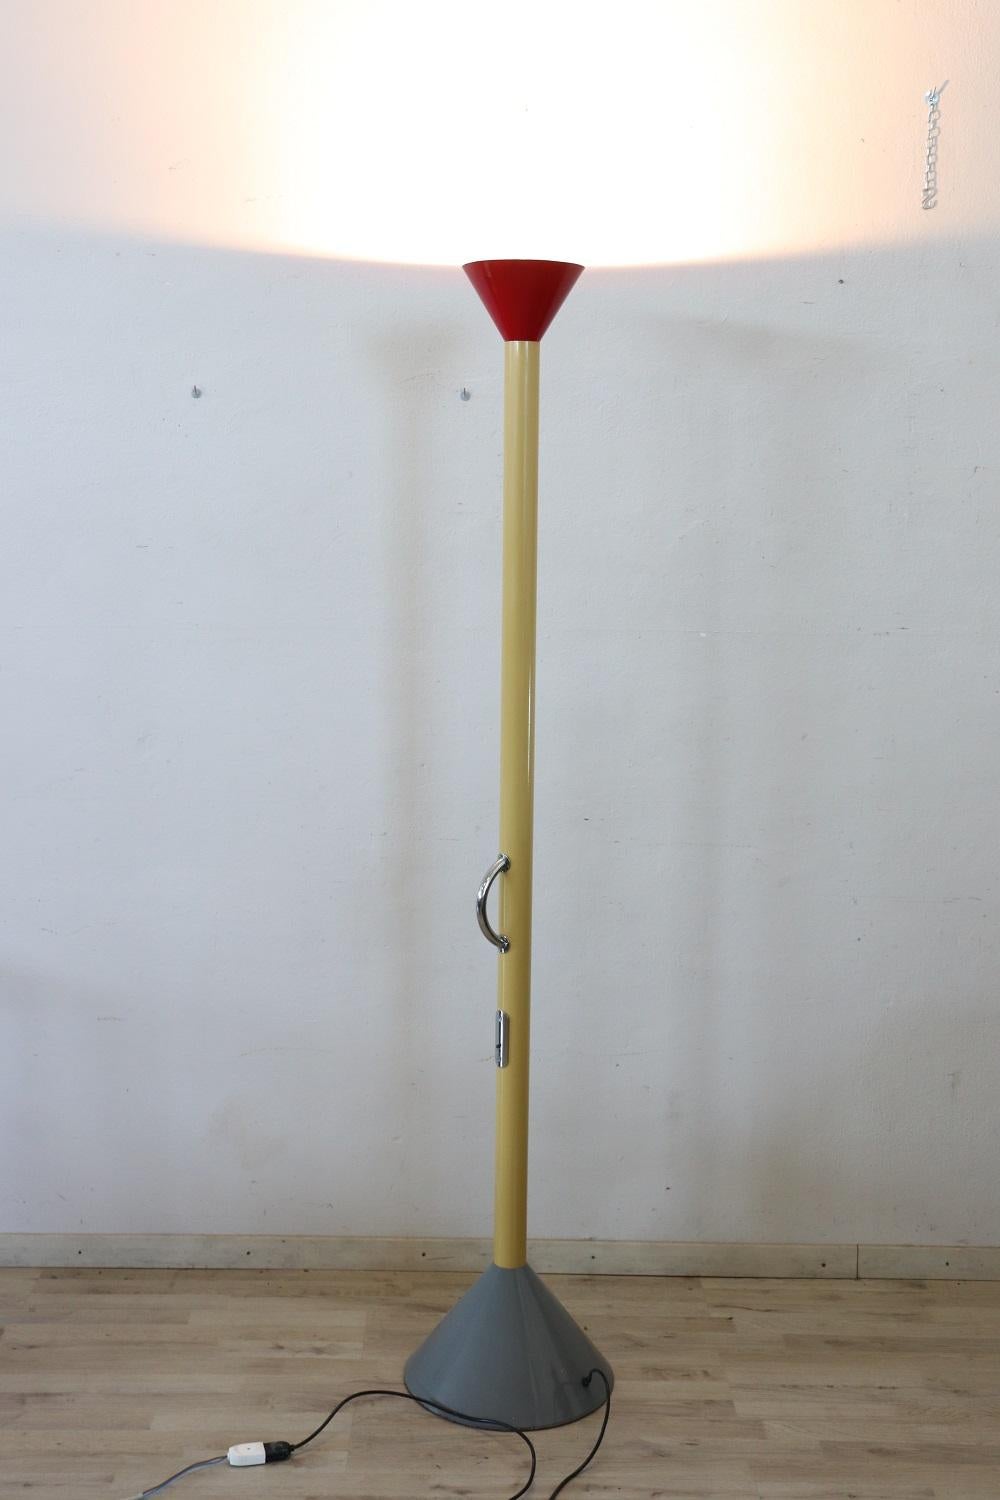 Created in the early 1980s by the great designer Ettore Sottsass, Callimaco is an object with an ambiguous and ironic design, a luminous sculpture inspired by the famous Greek artist Callimaco of Athens from the 5th century. The Callimaco floor lamp